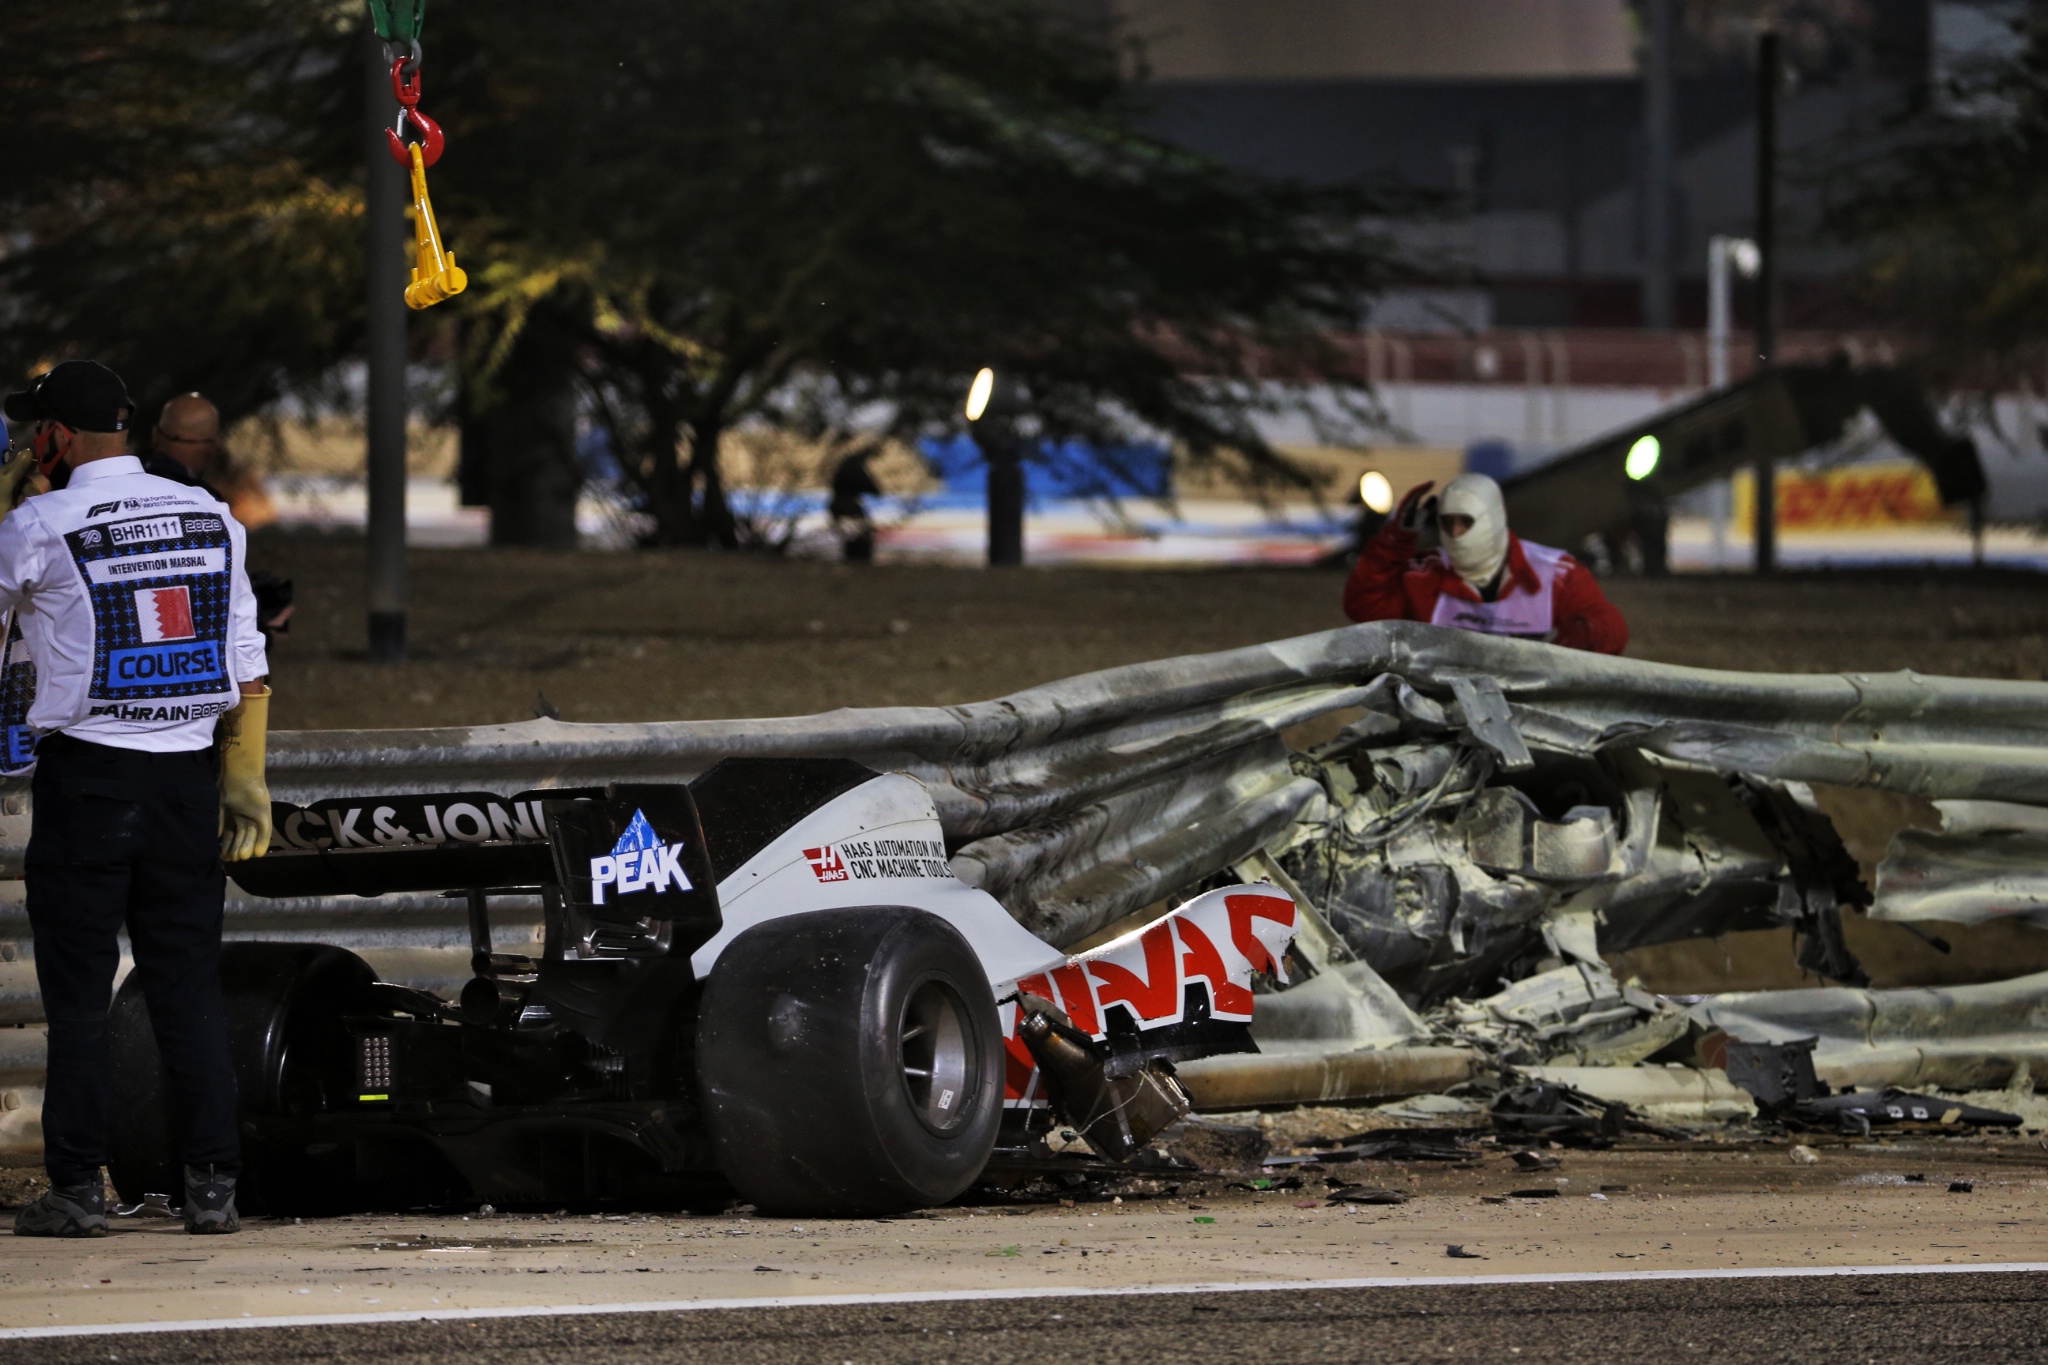 The heavily damaged Haas F1 Team VF-20 of Romain Grosjean (FRA) Haas F1 Team after crashed at the start of the race and exploded into flames, destroying the armco barrier.